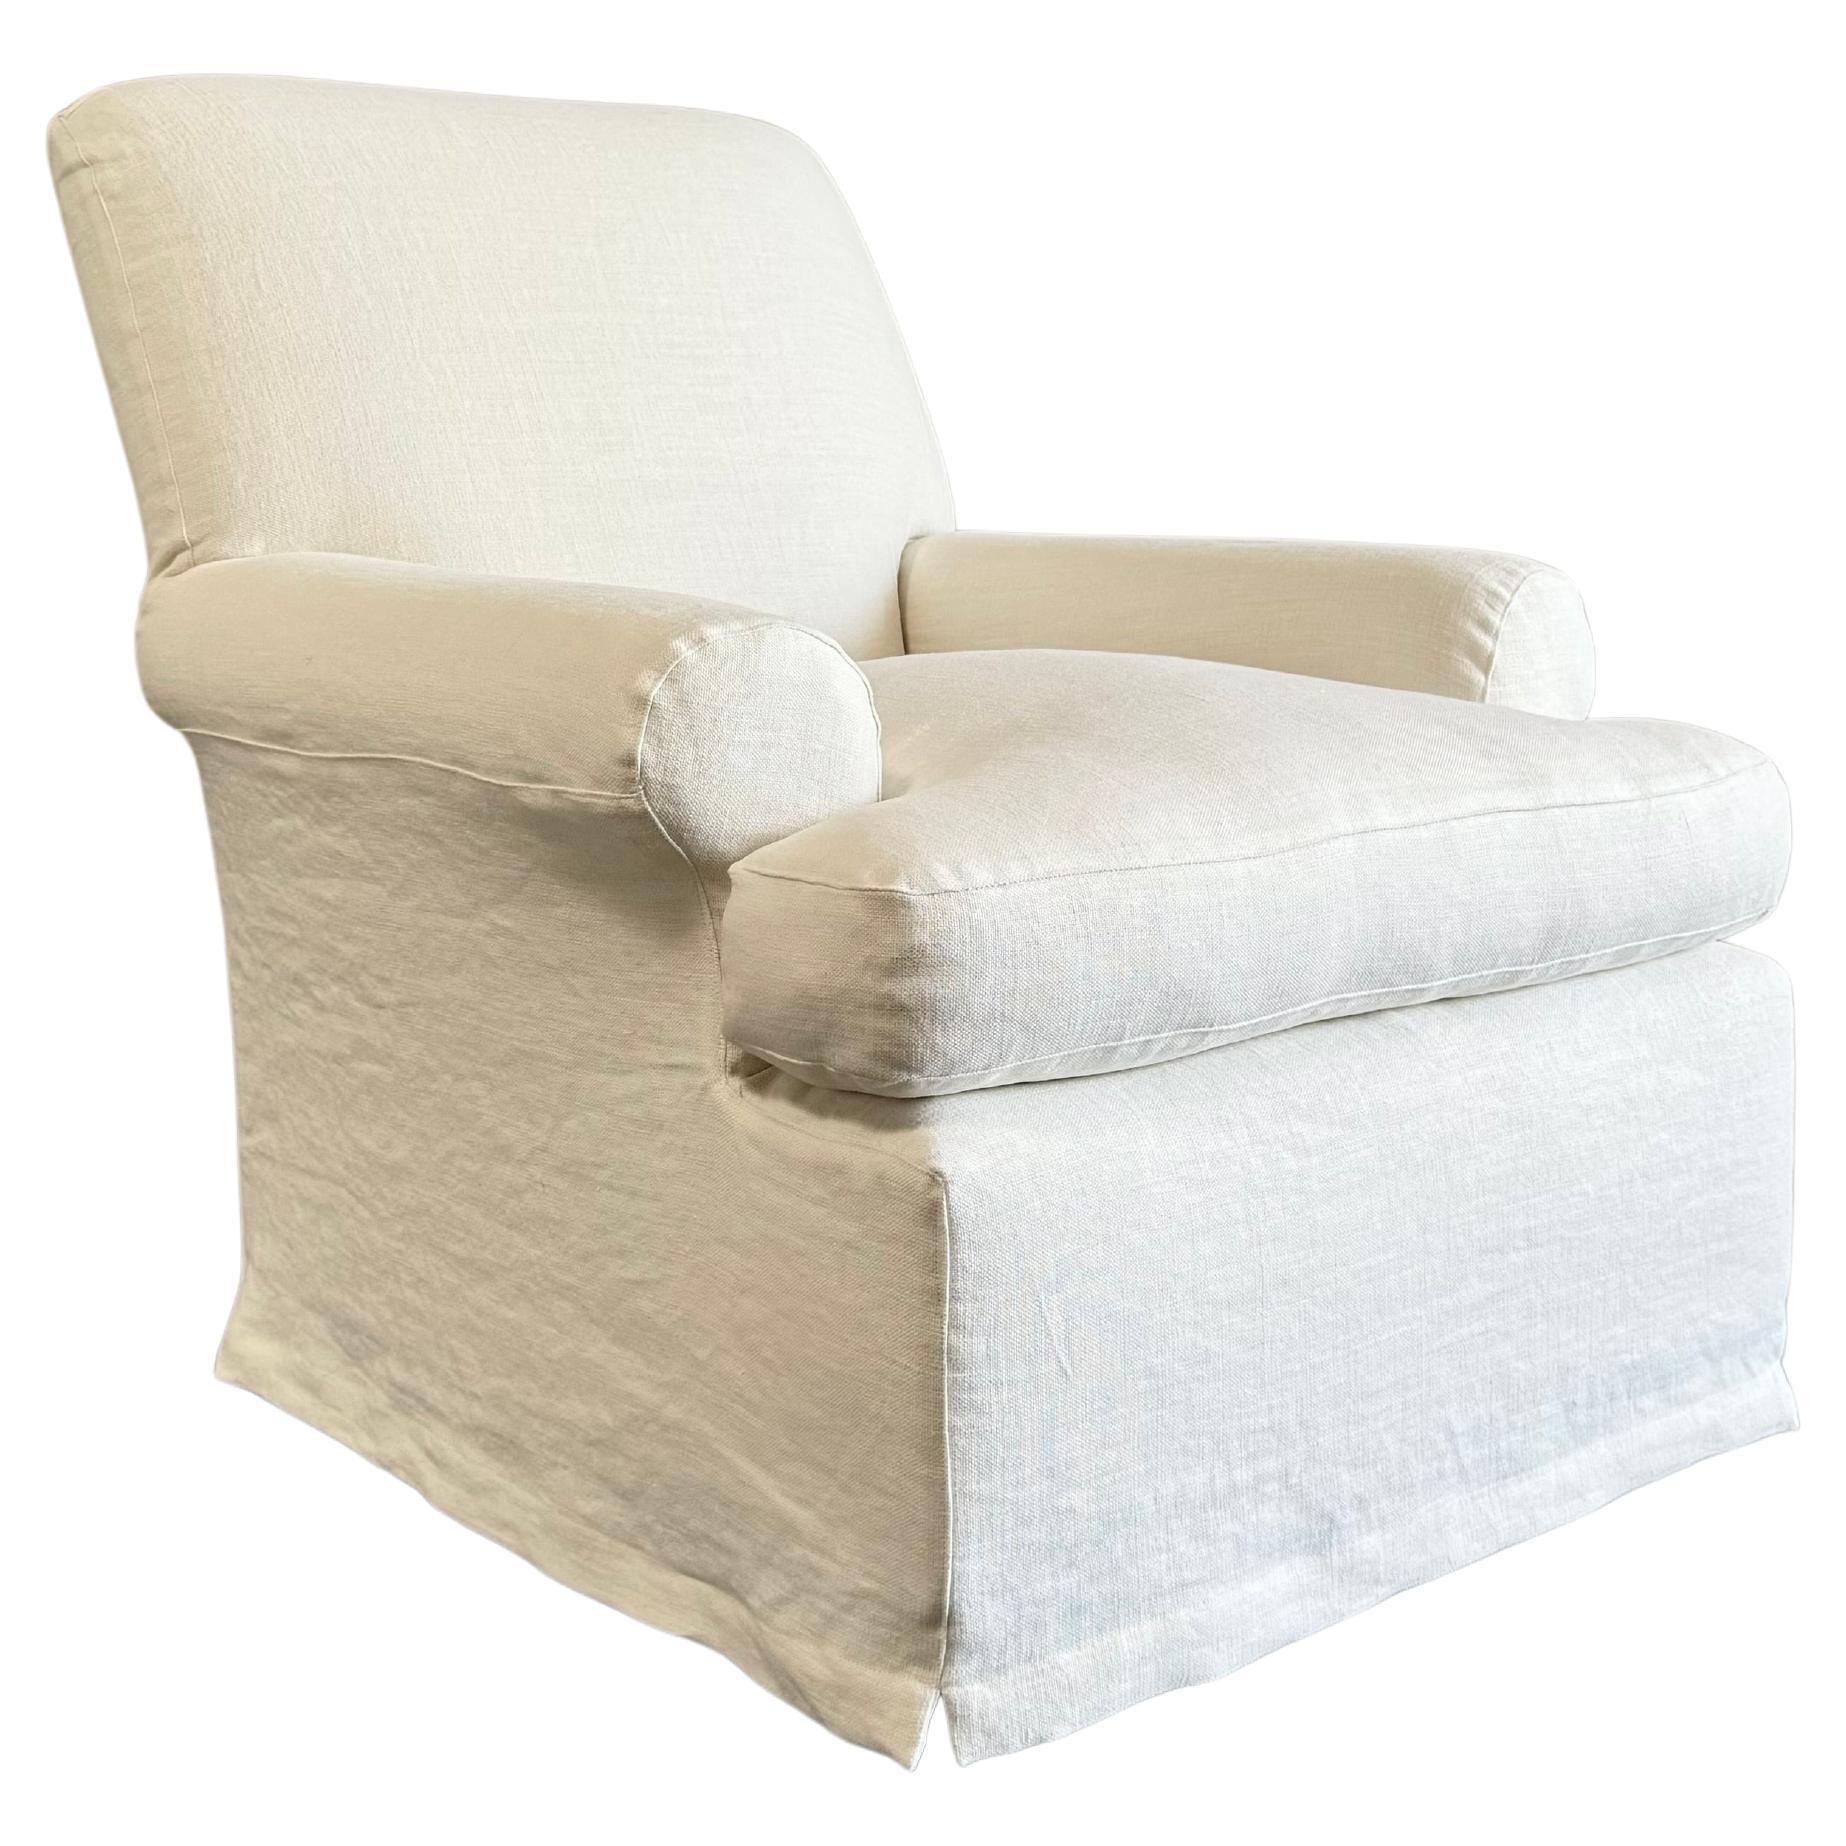 Custom Made to Order Belgian Linen Slip Cover Club Chair with Down Cushion 